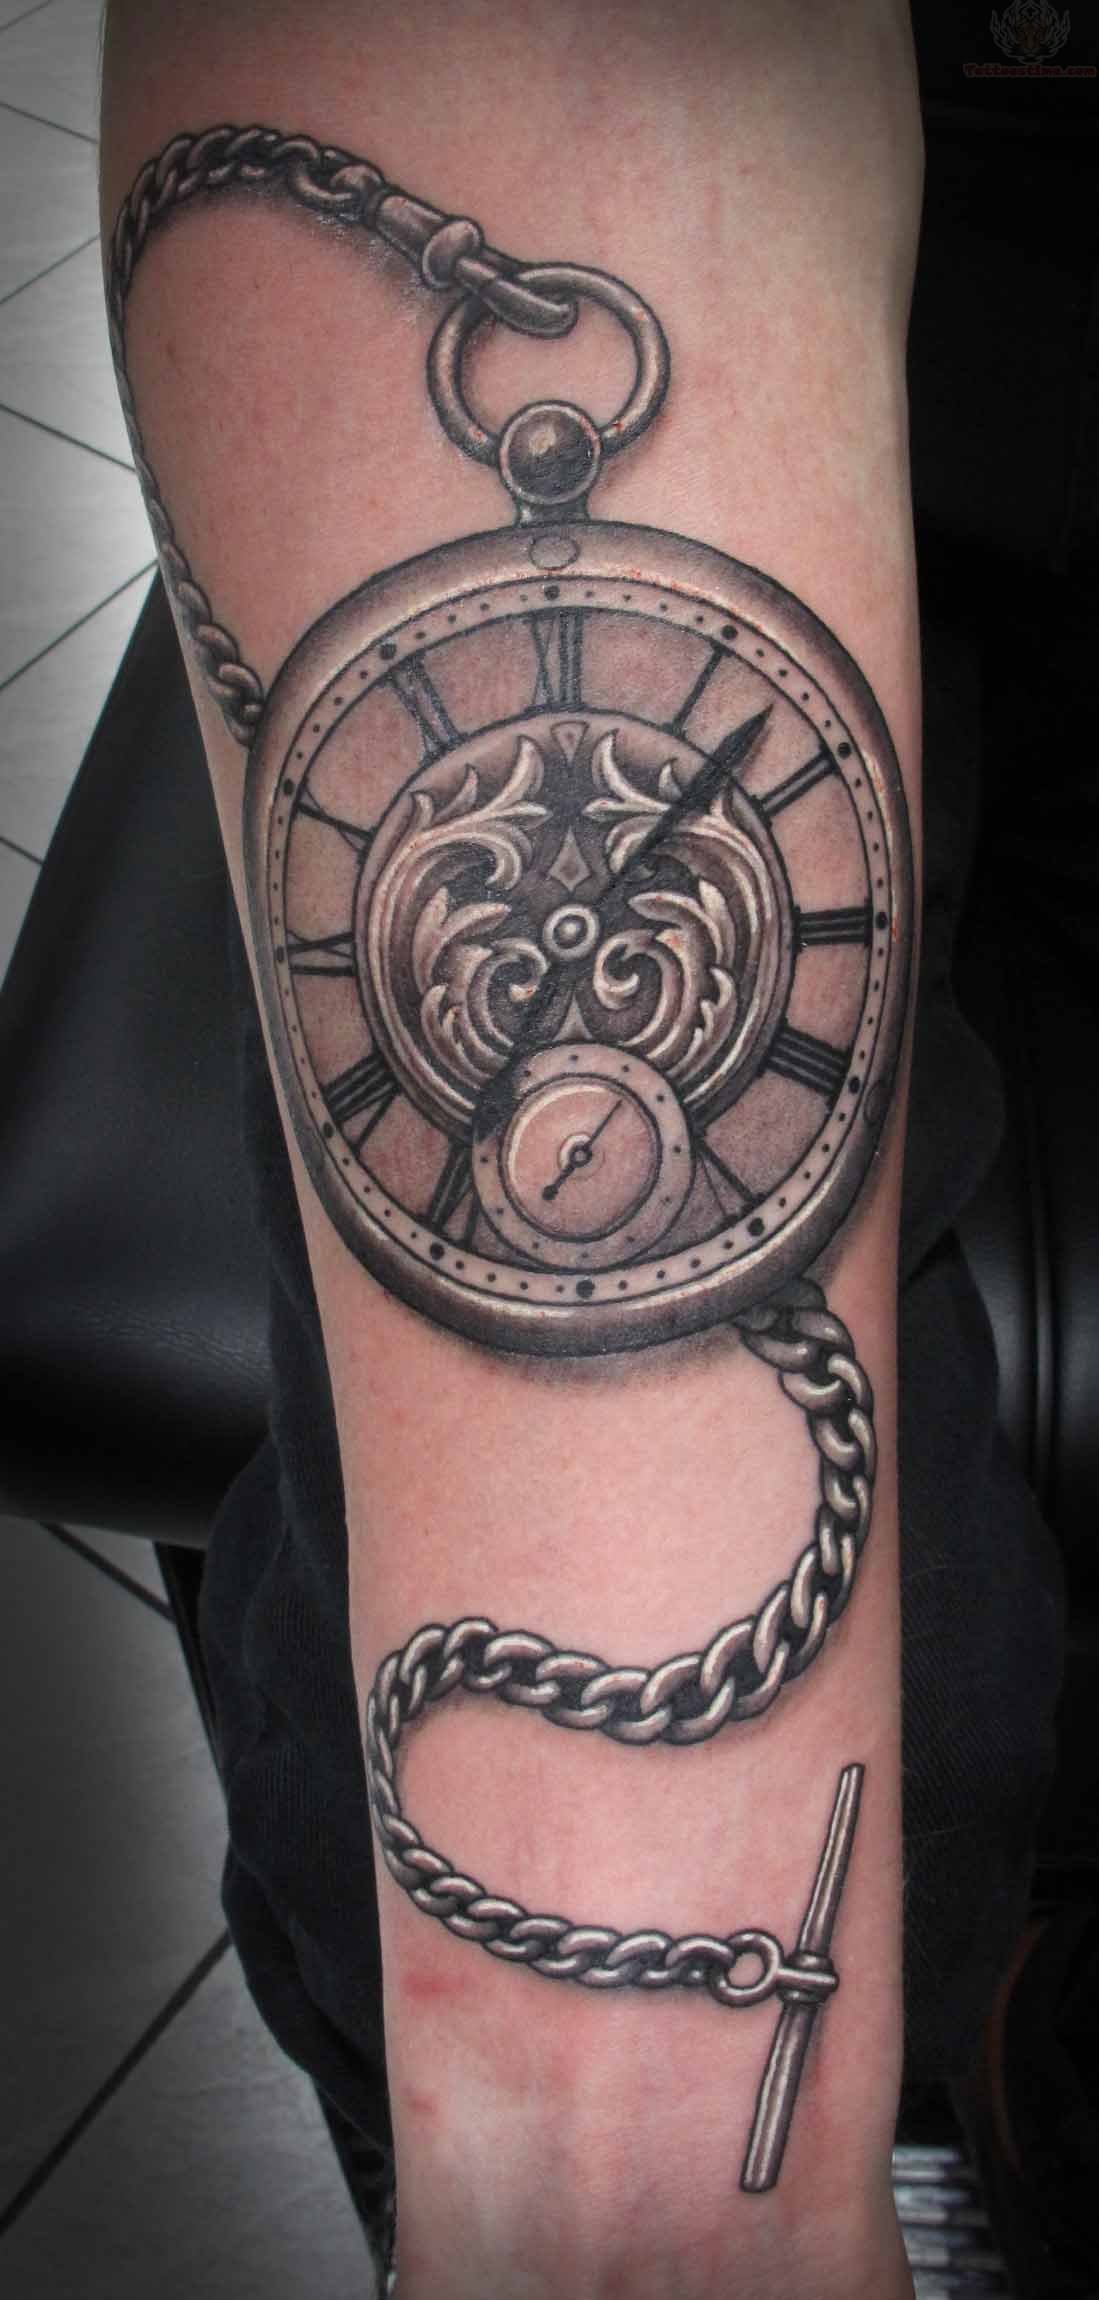 Unique Pocket Watch Tattoo Design For Forearm